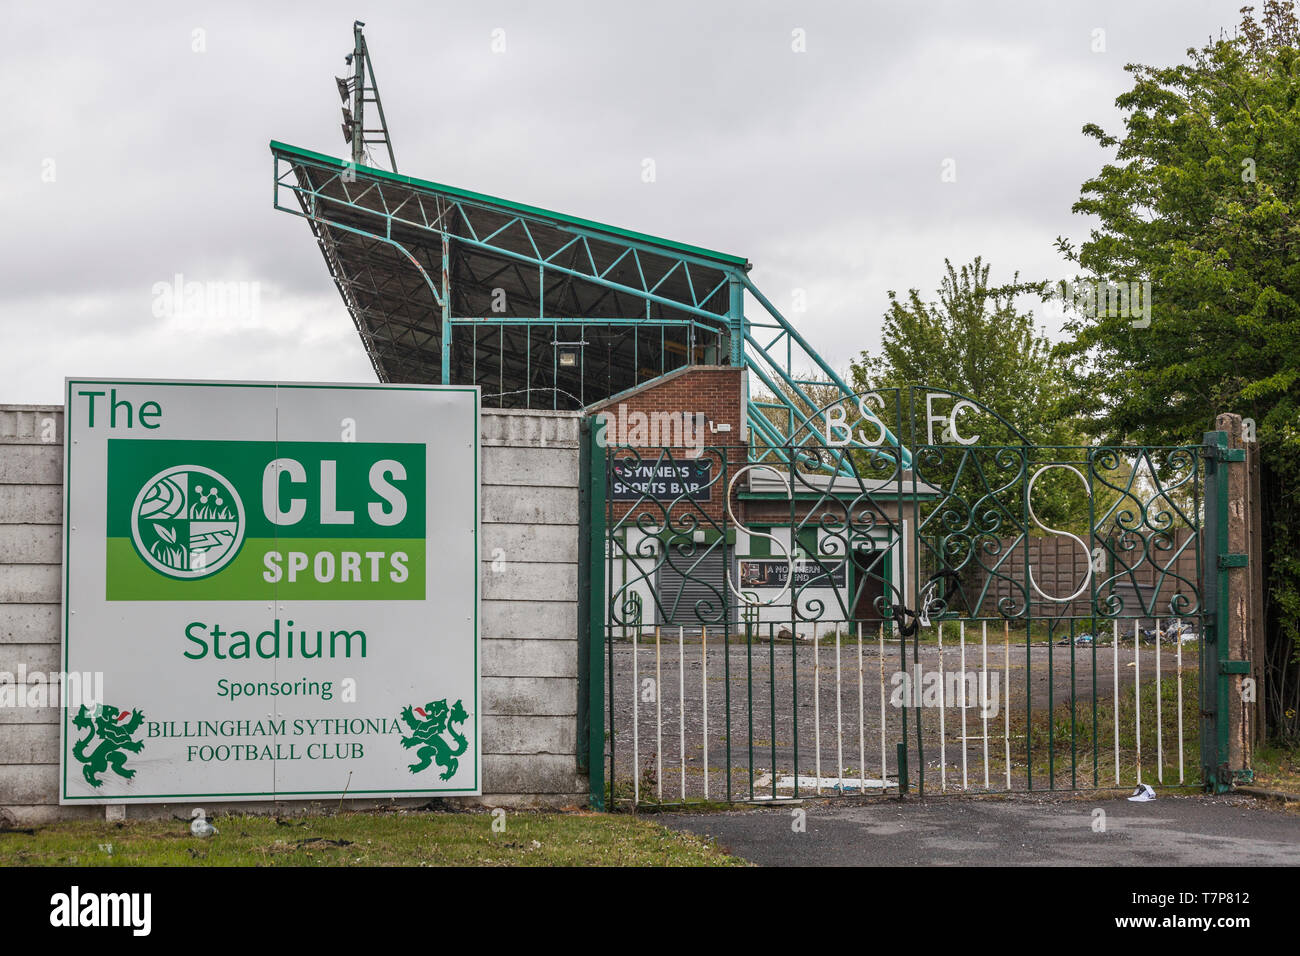 The former football ground of Billingham Synthonia Football Club, in Central Avenue,Billingham,England,UK Stock Photo